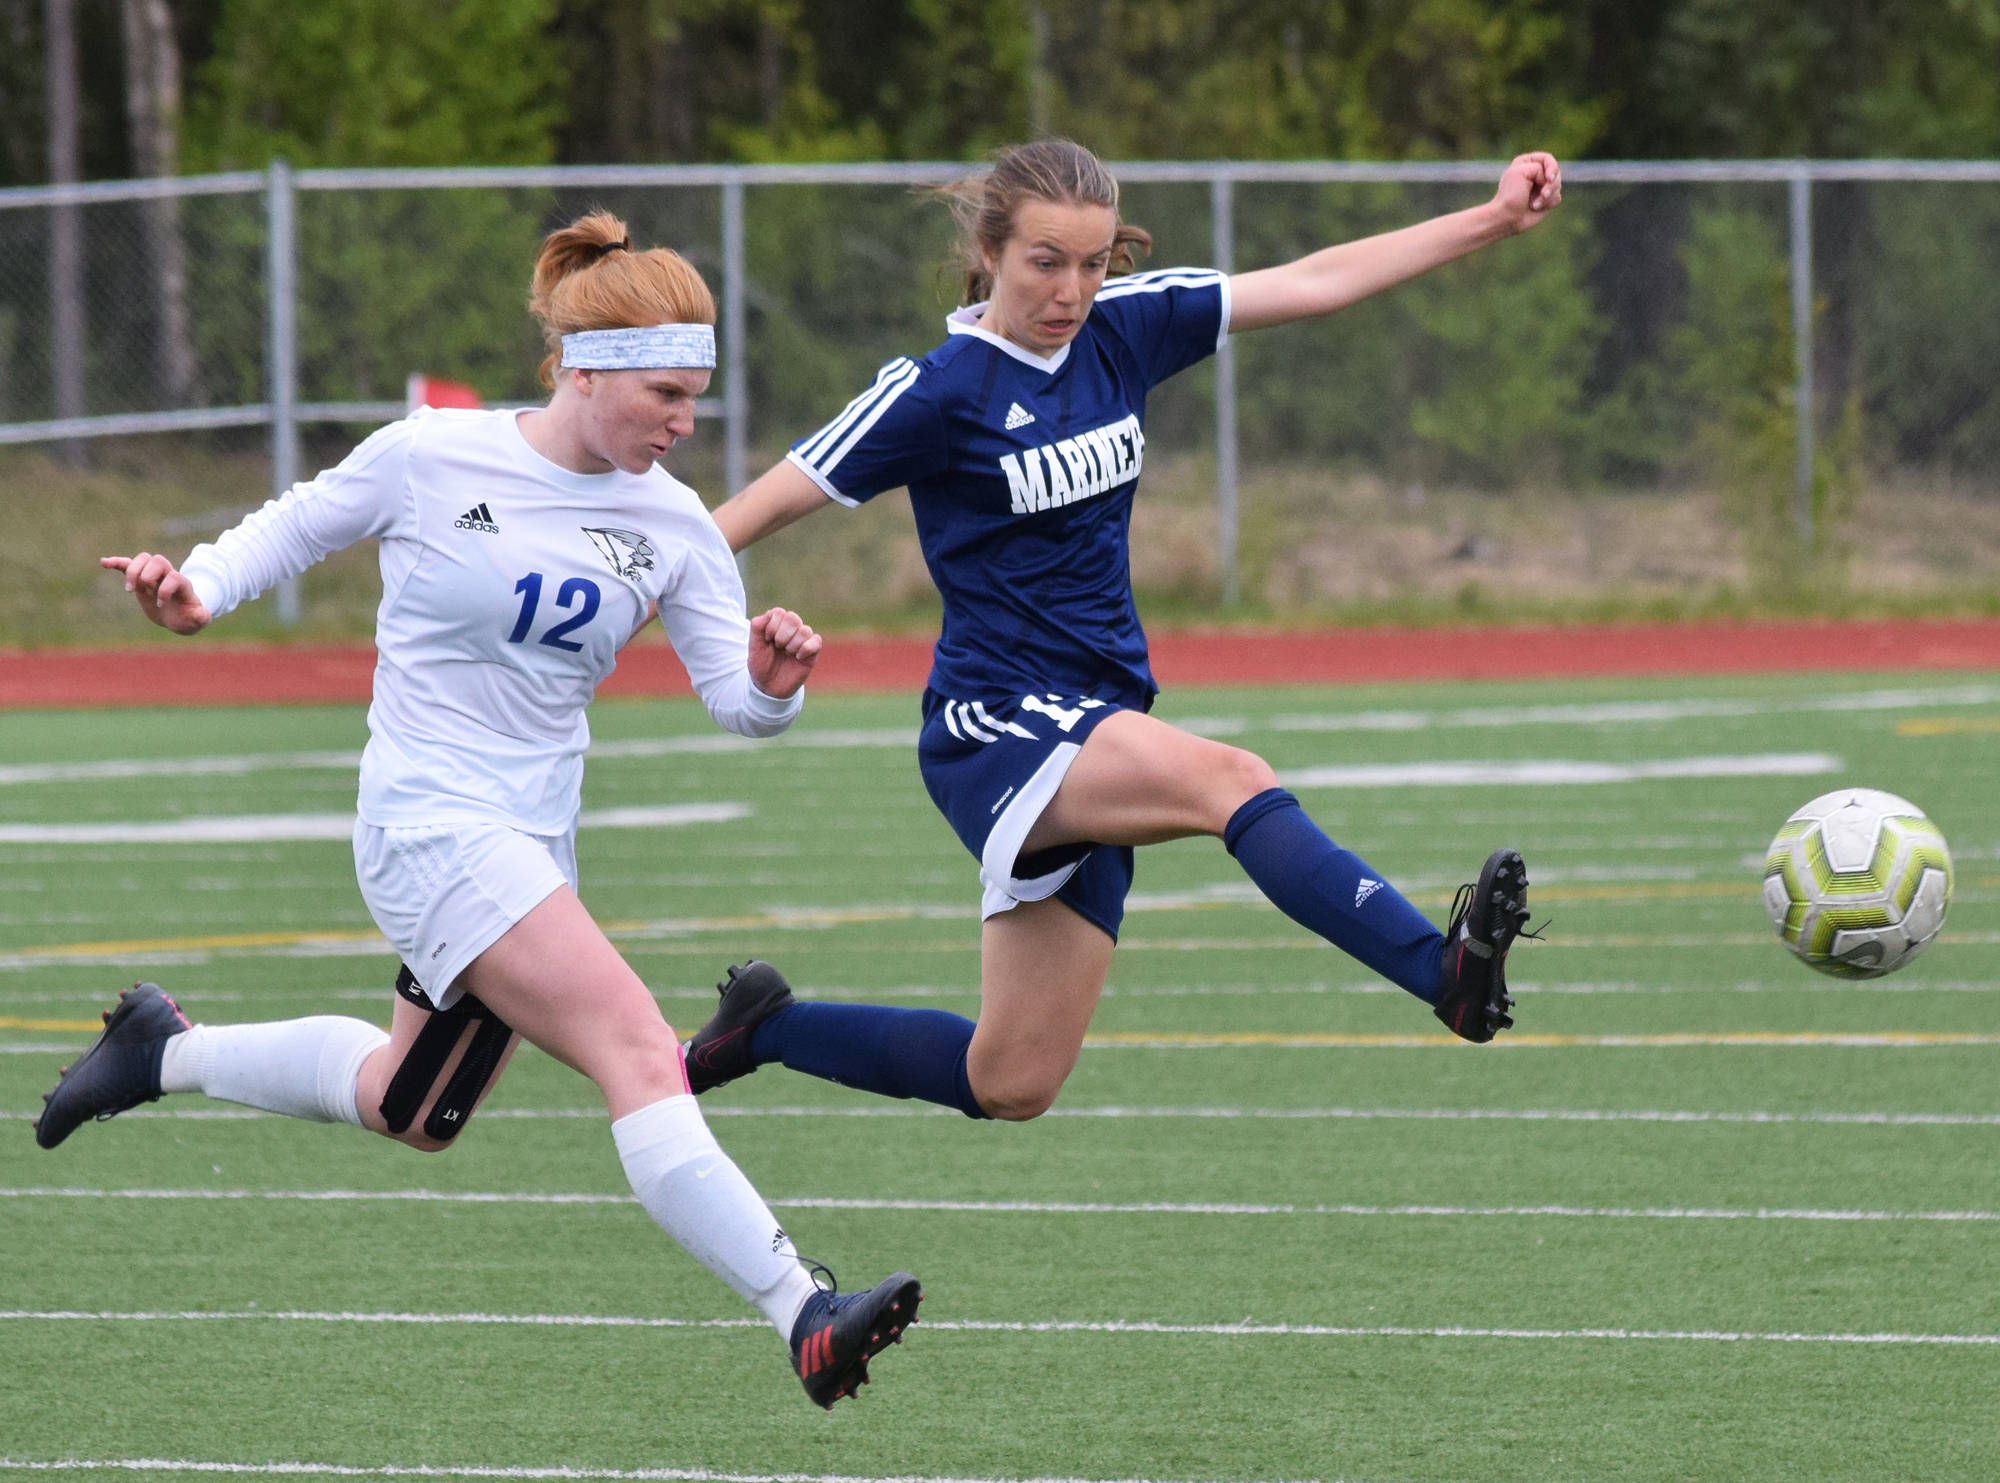 Thunder Mountain’s Emily Heaton (left) and Homer’s Kappa Reutov battle for the ball Thursday, May 23, 2019, at the Div. II state soccer championships in Eagle River. (Photo by Joey Klecka/Peninsula Clarion)